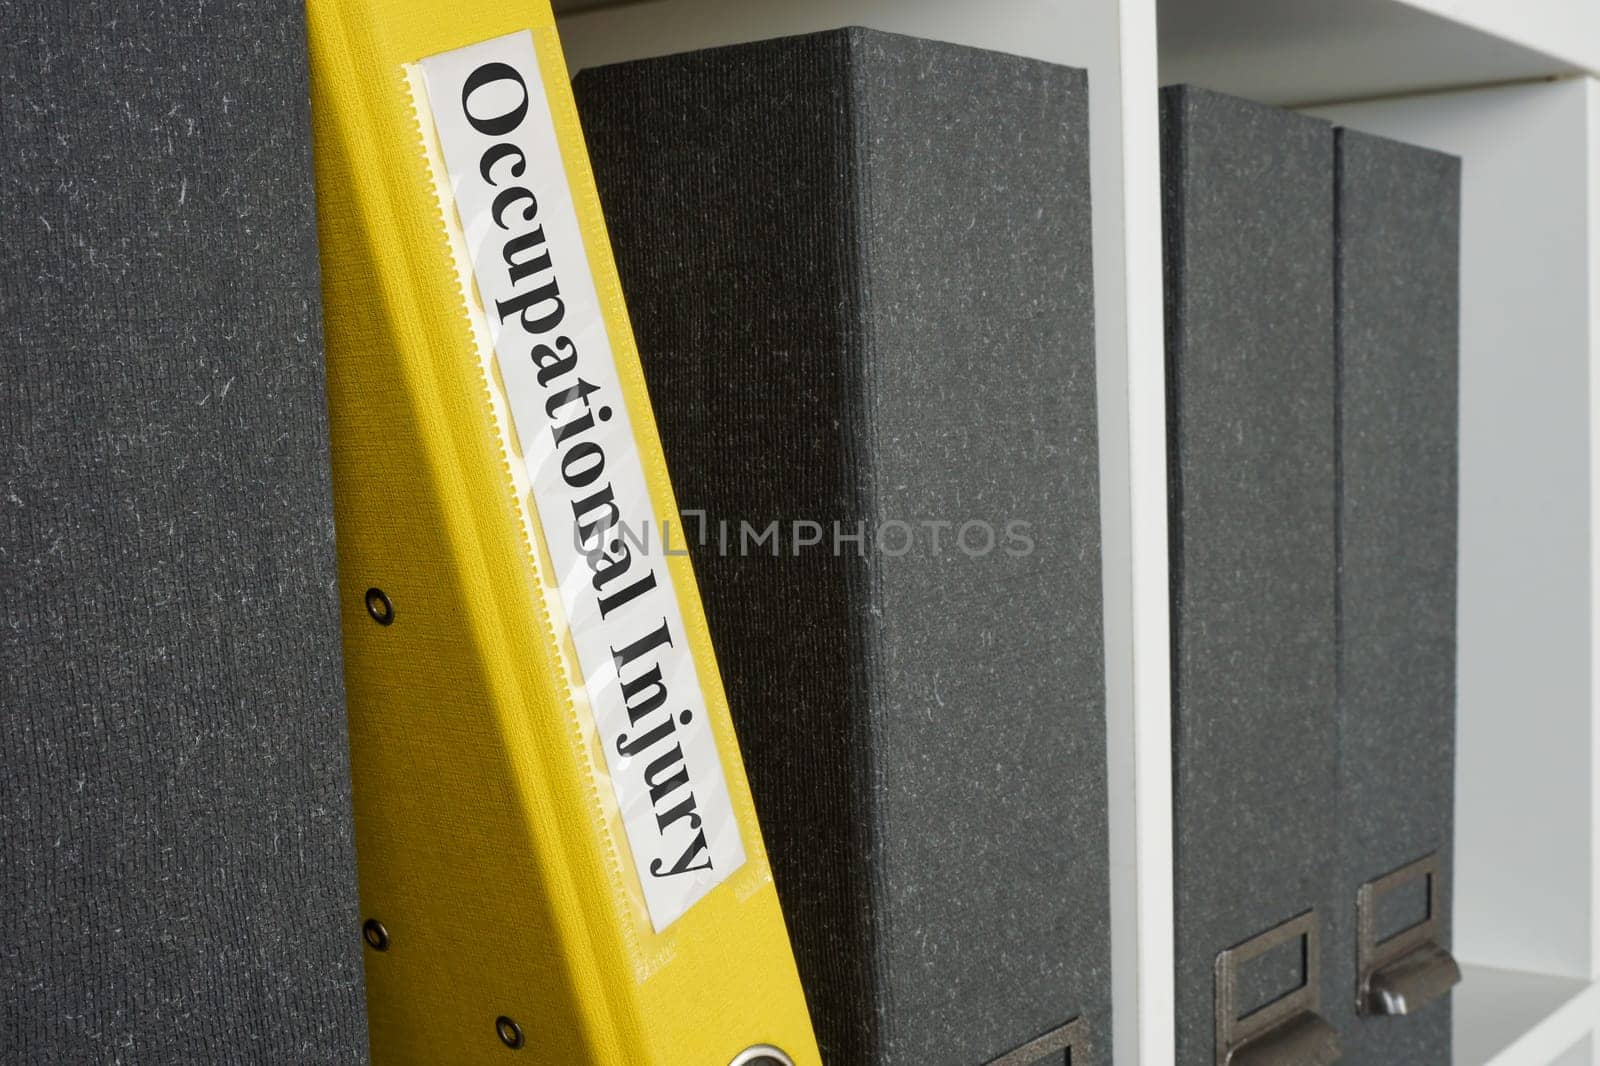 Folder with reports about occupational injury on the shelf. by designer491